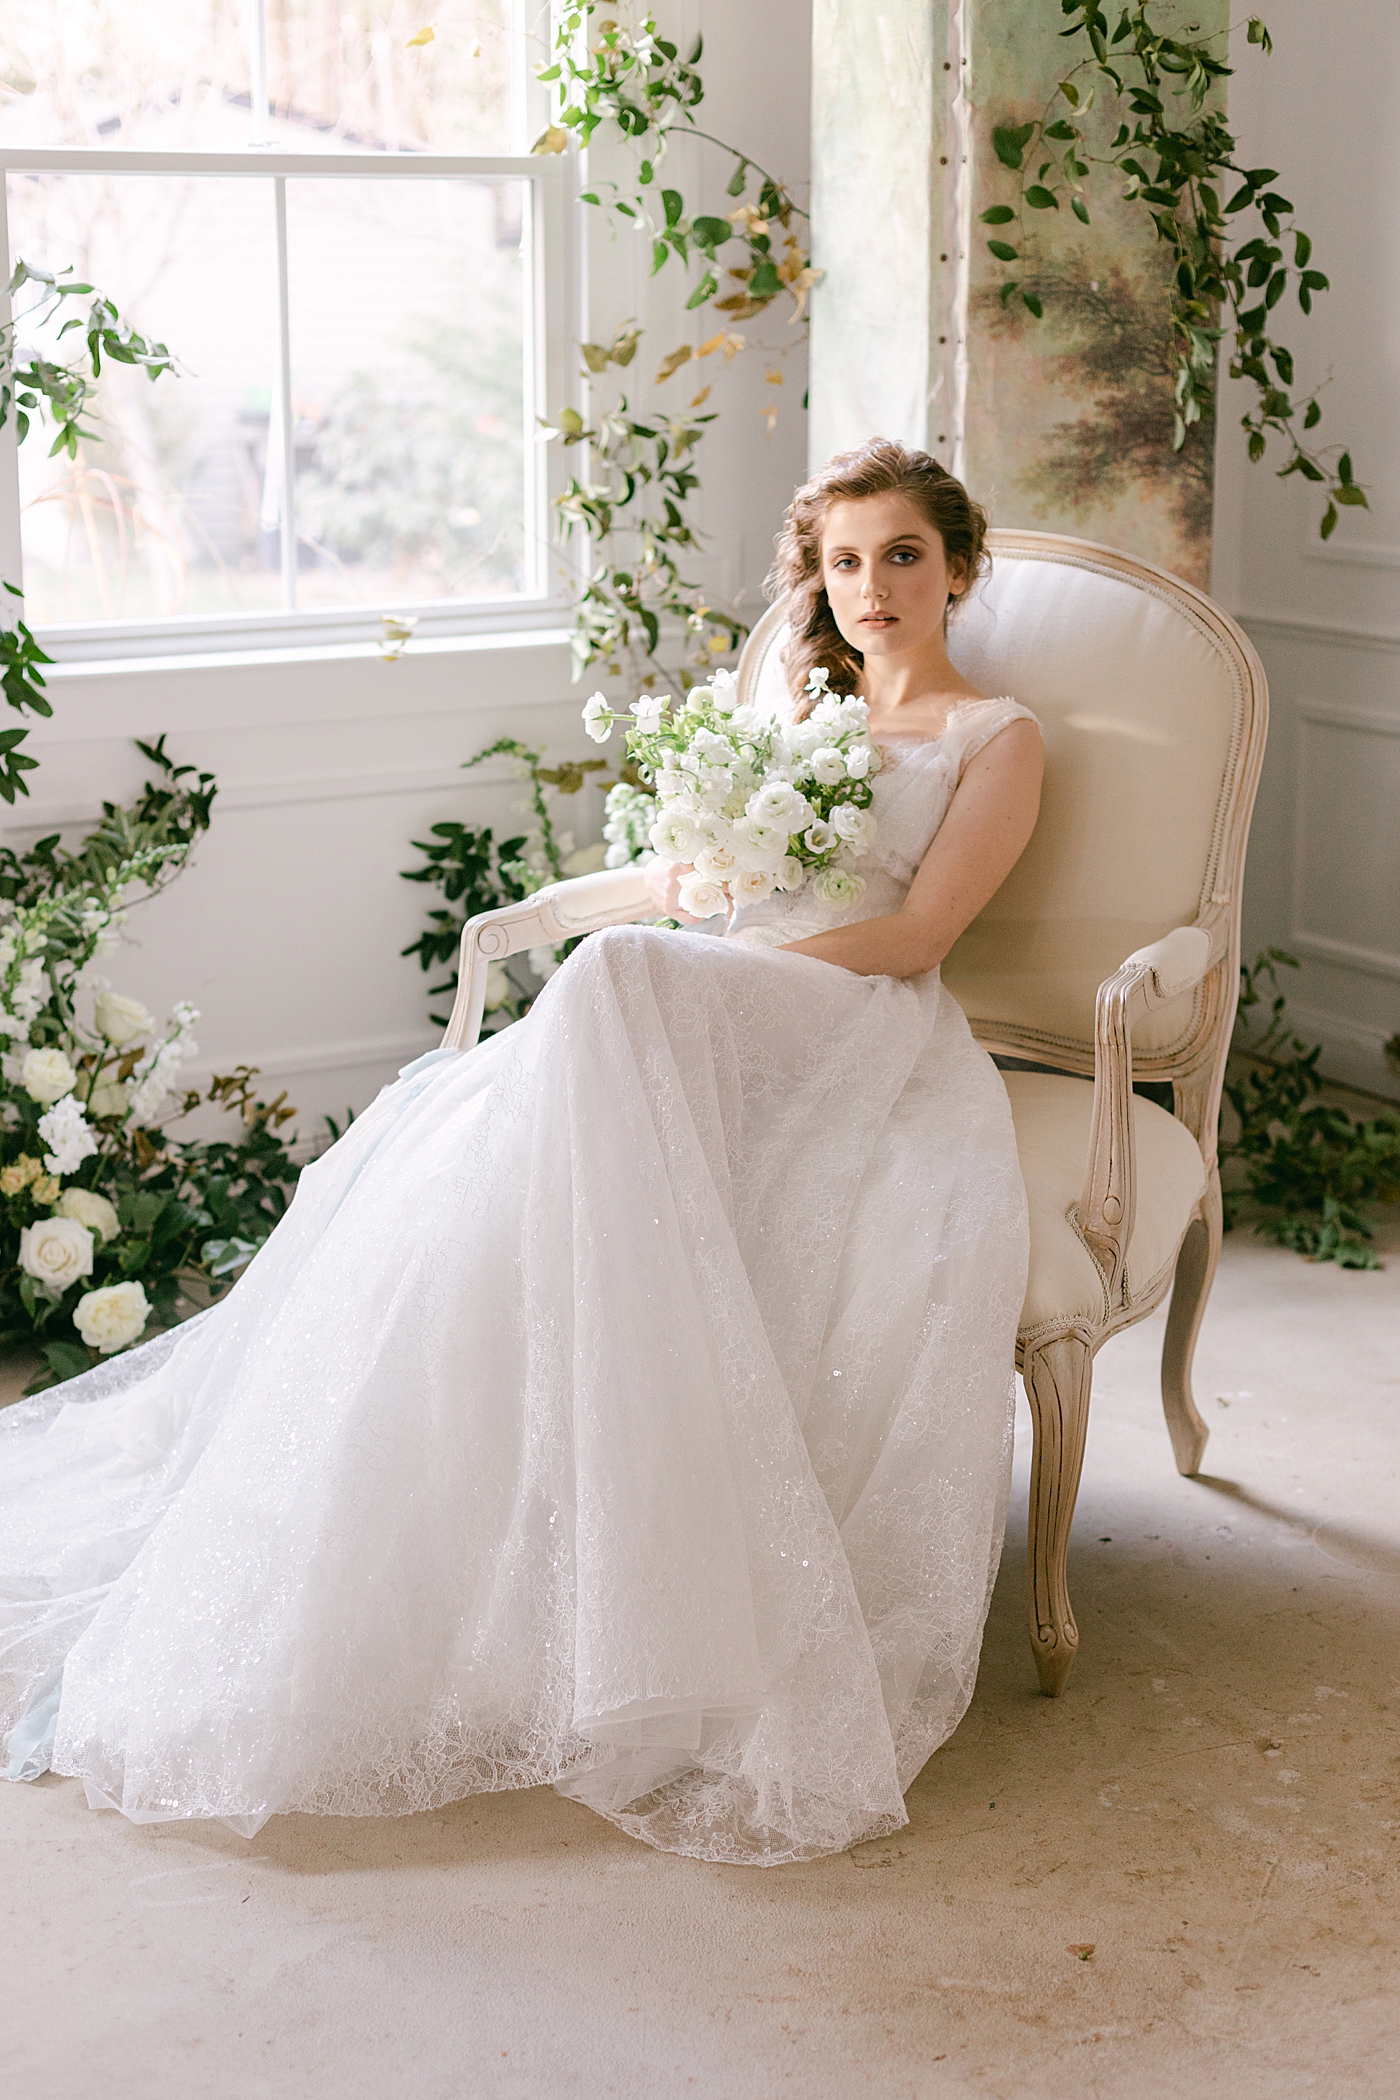 Bride sitting in a chair holding a bouquet during Old World Romance Editorial | Photo by Hope Helmuth Photograpghy